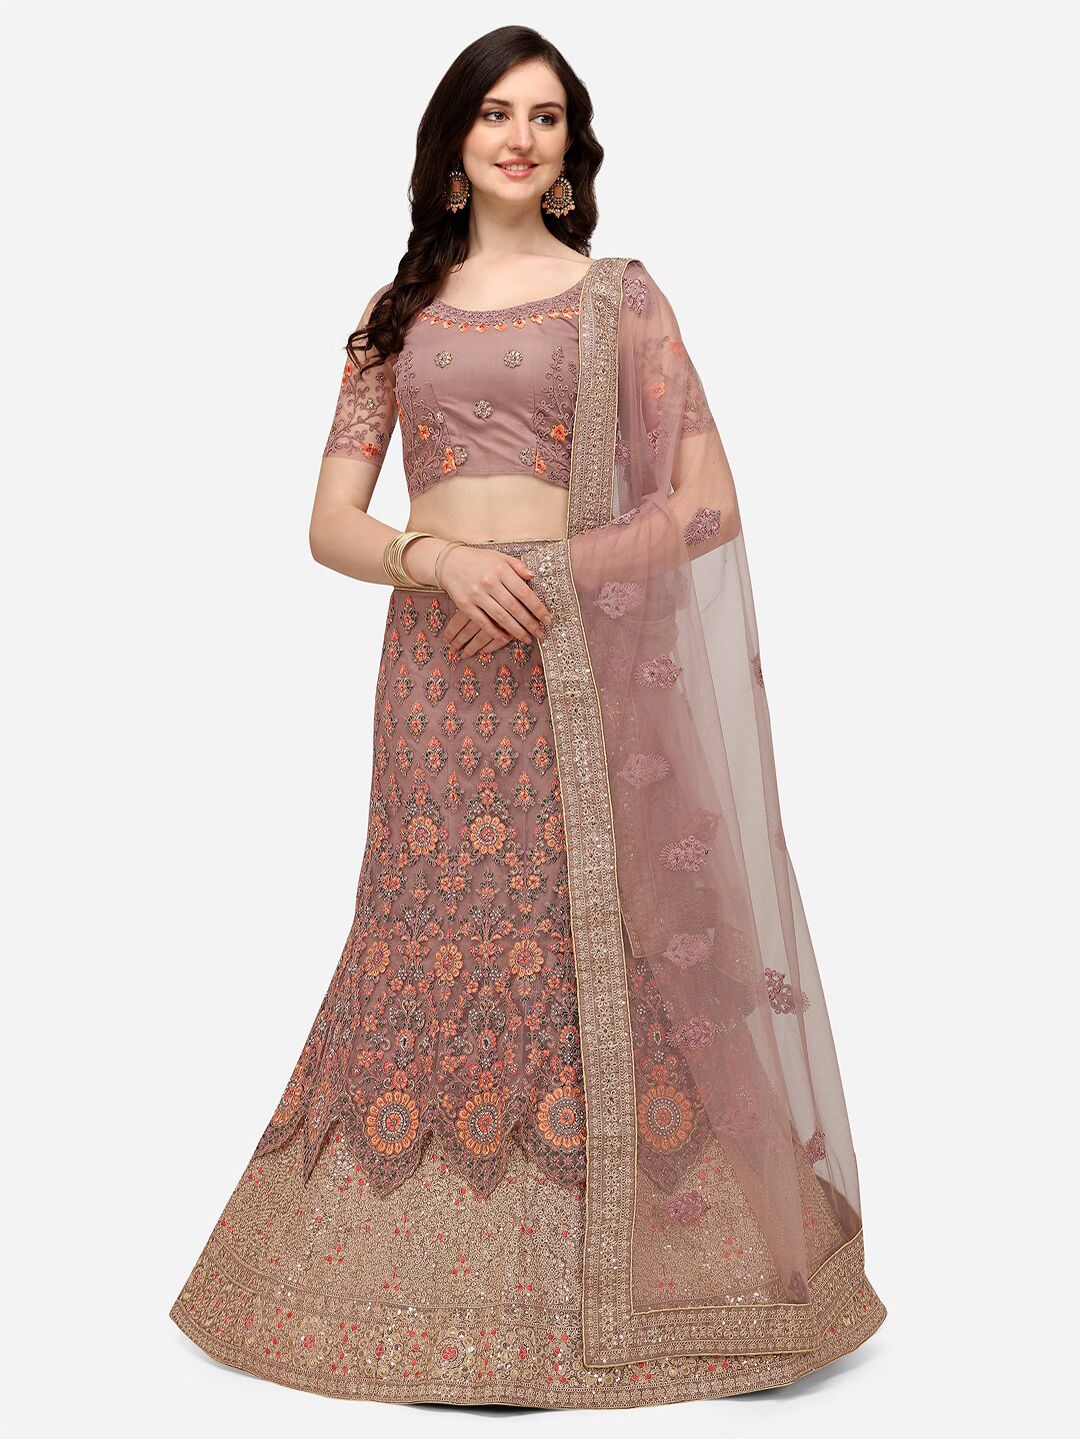 VRSALES Mauve Embroidered Semi-Stitched Lehenga & Unstitched Blouse With Dupatta Price in India